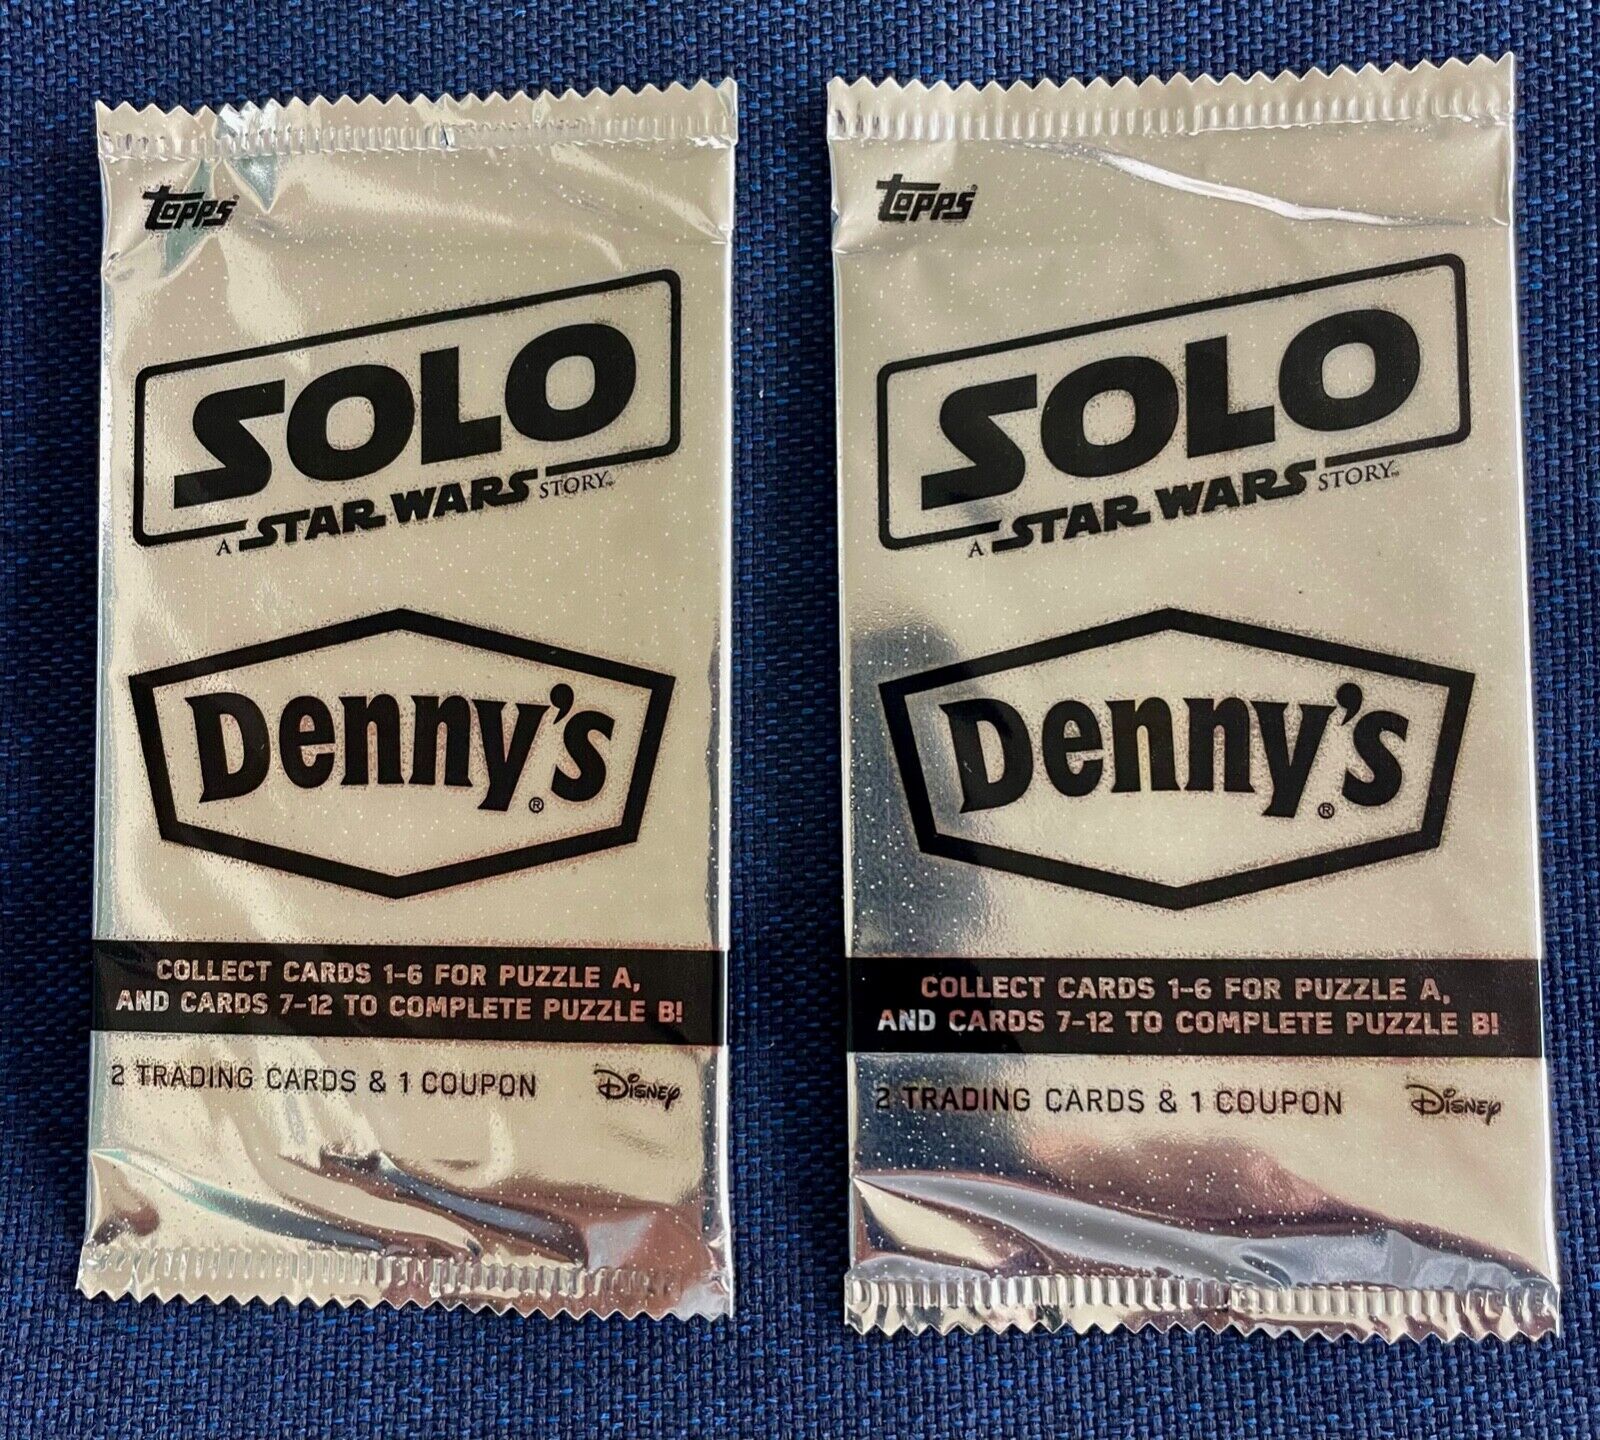 Lot of Two 2018 Topps DENNY’S SOLO: a Star Wars Story Sealed Card packs